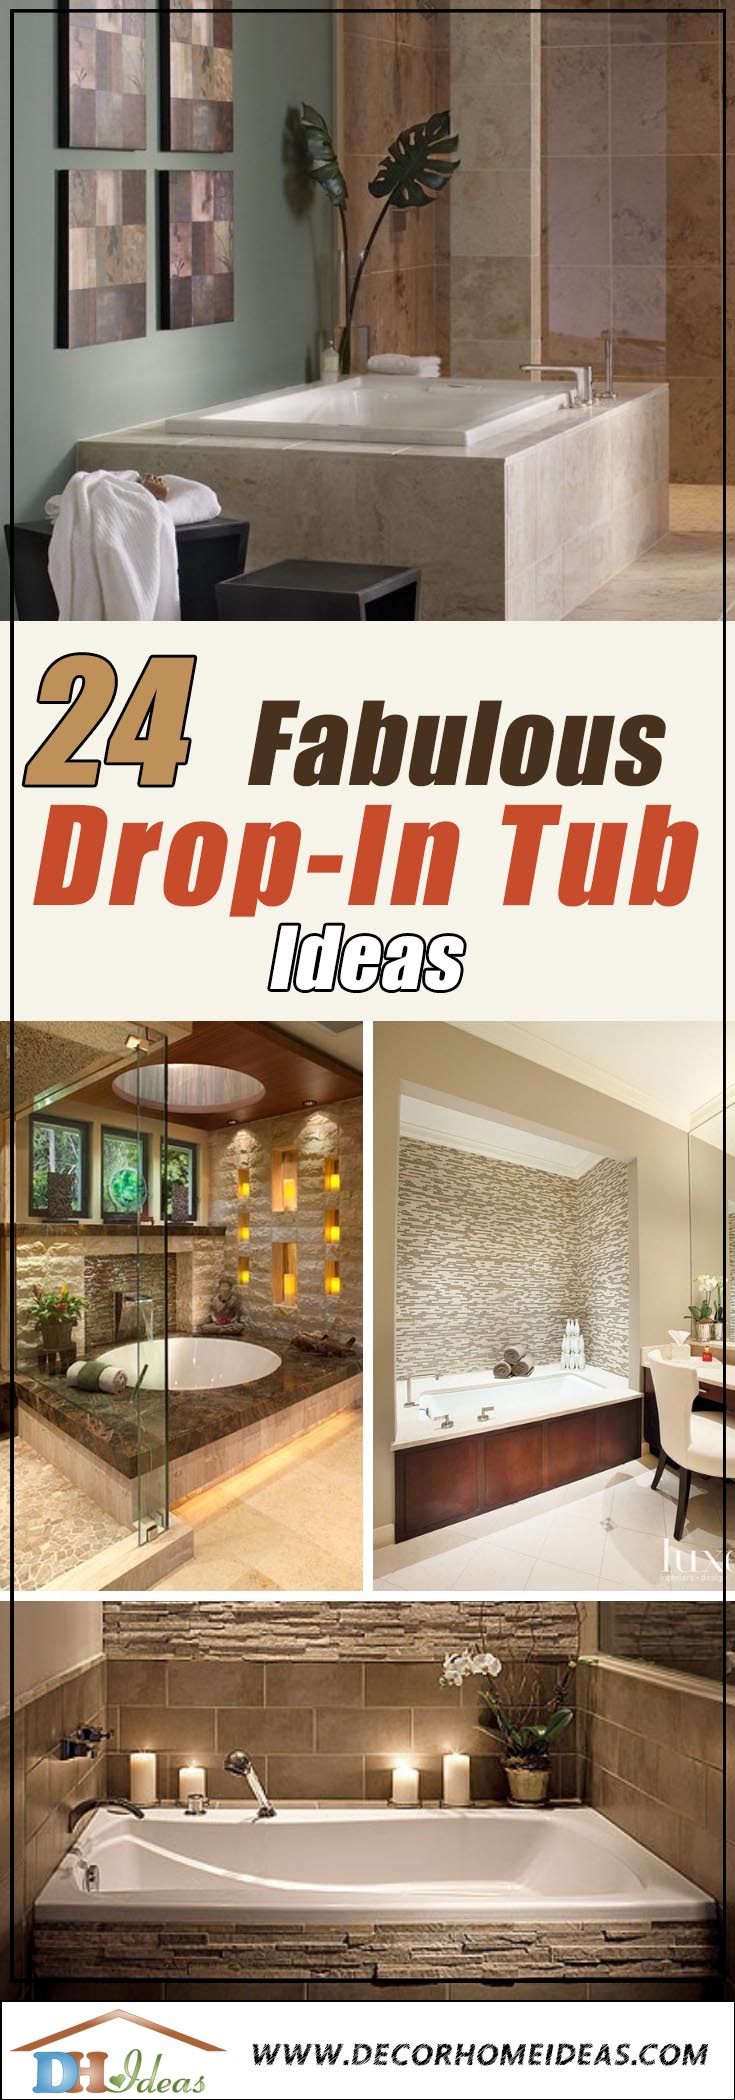 24 Fabulous Drop In Tub Ideas And, Tile Design Ideas For Tub Surrounds